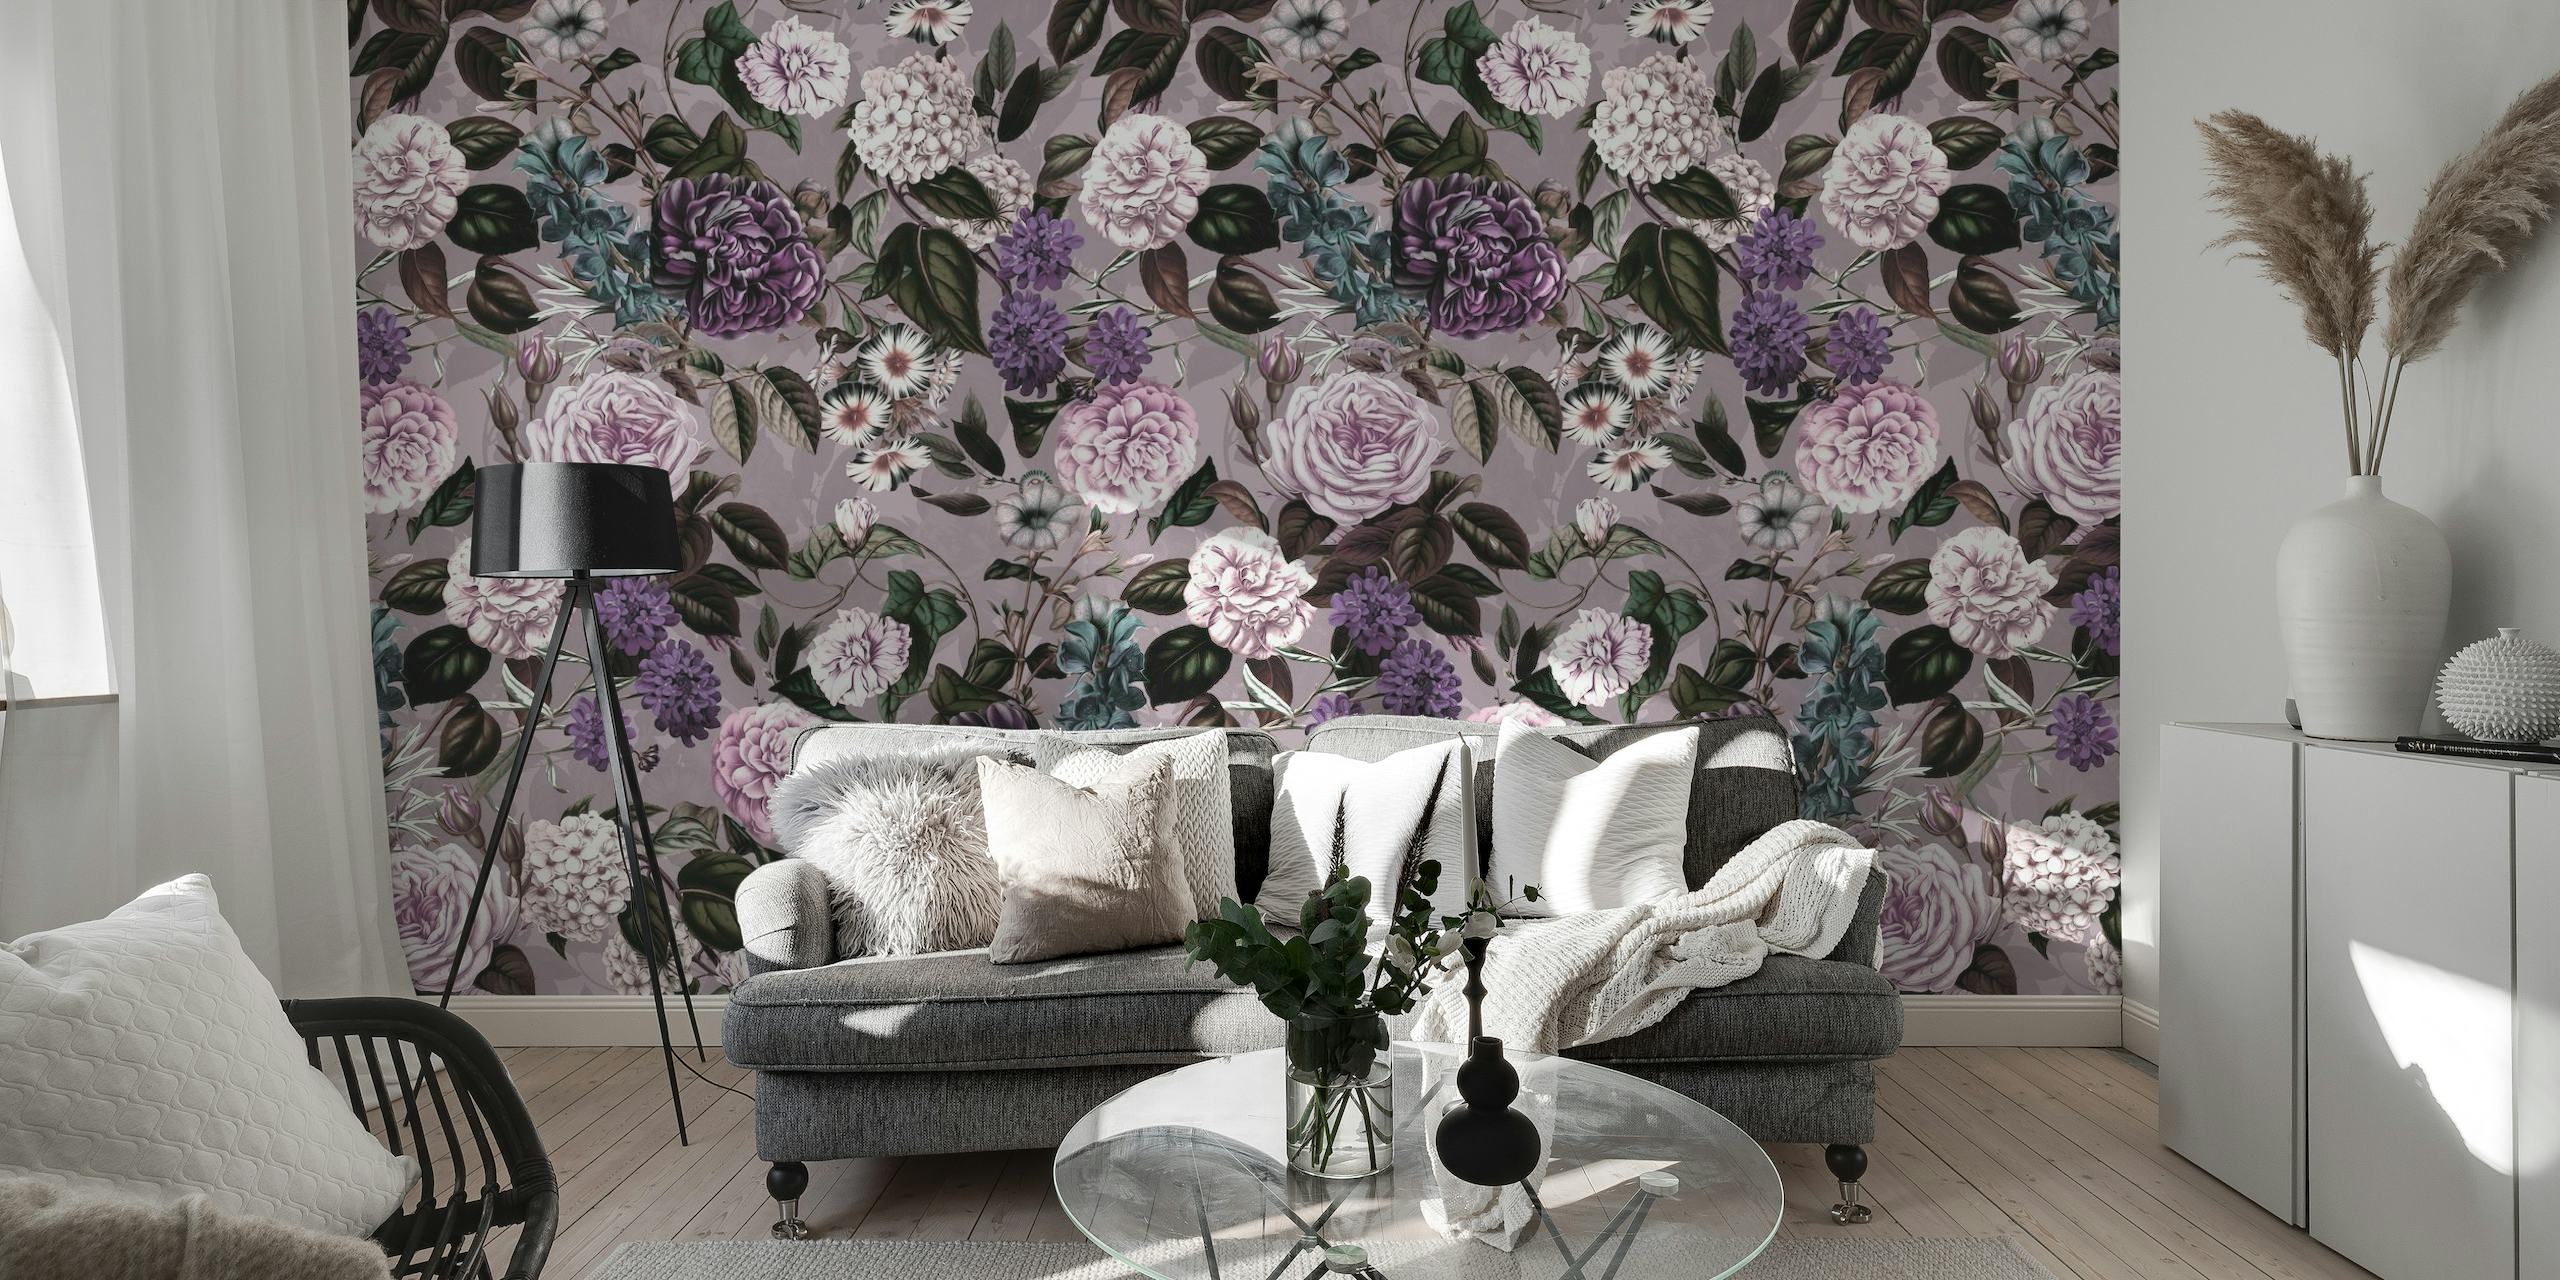 Gothic Dreams II wall mural with dark purple and lavender roses on a moody background